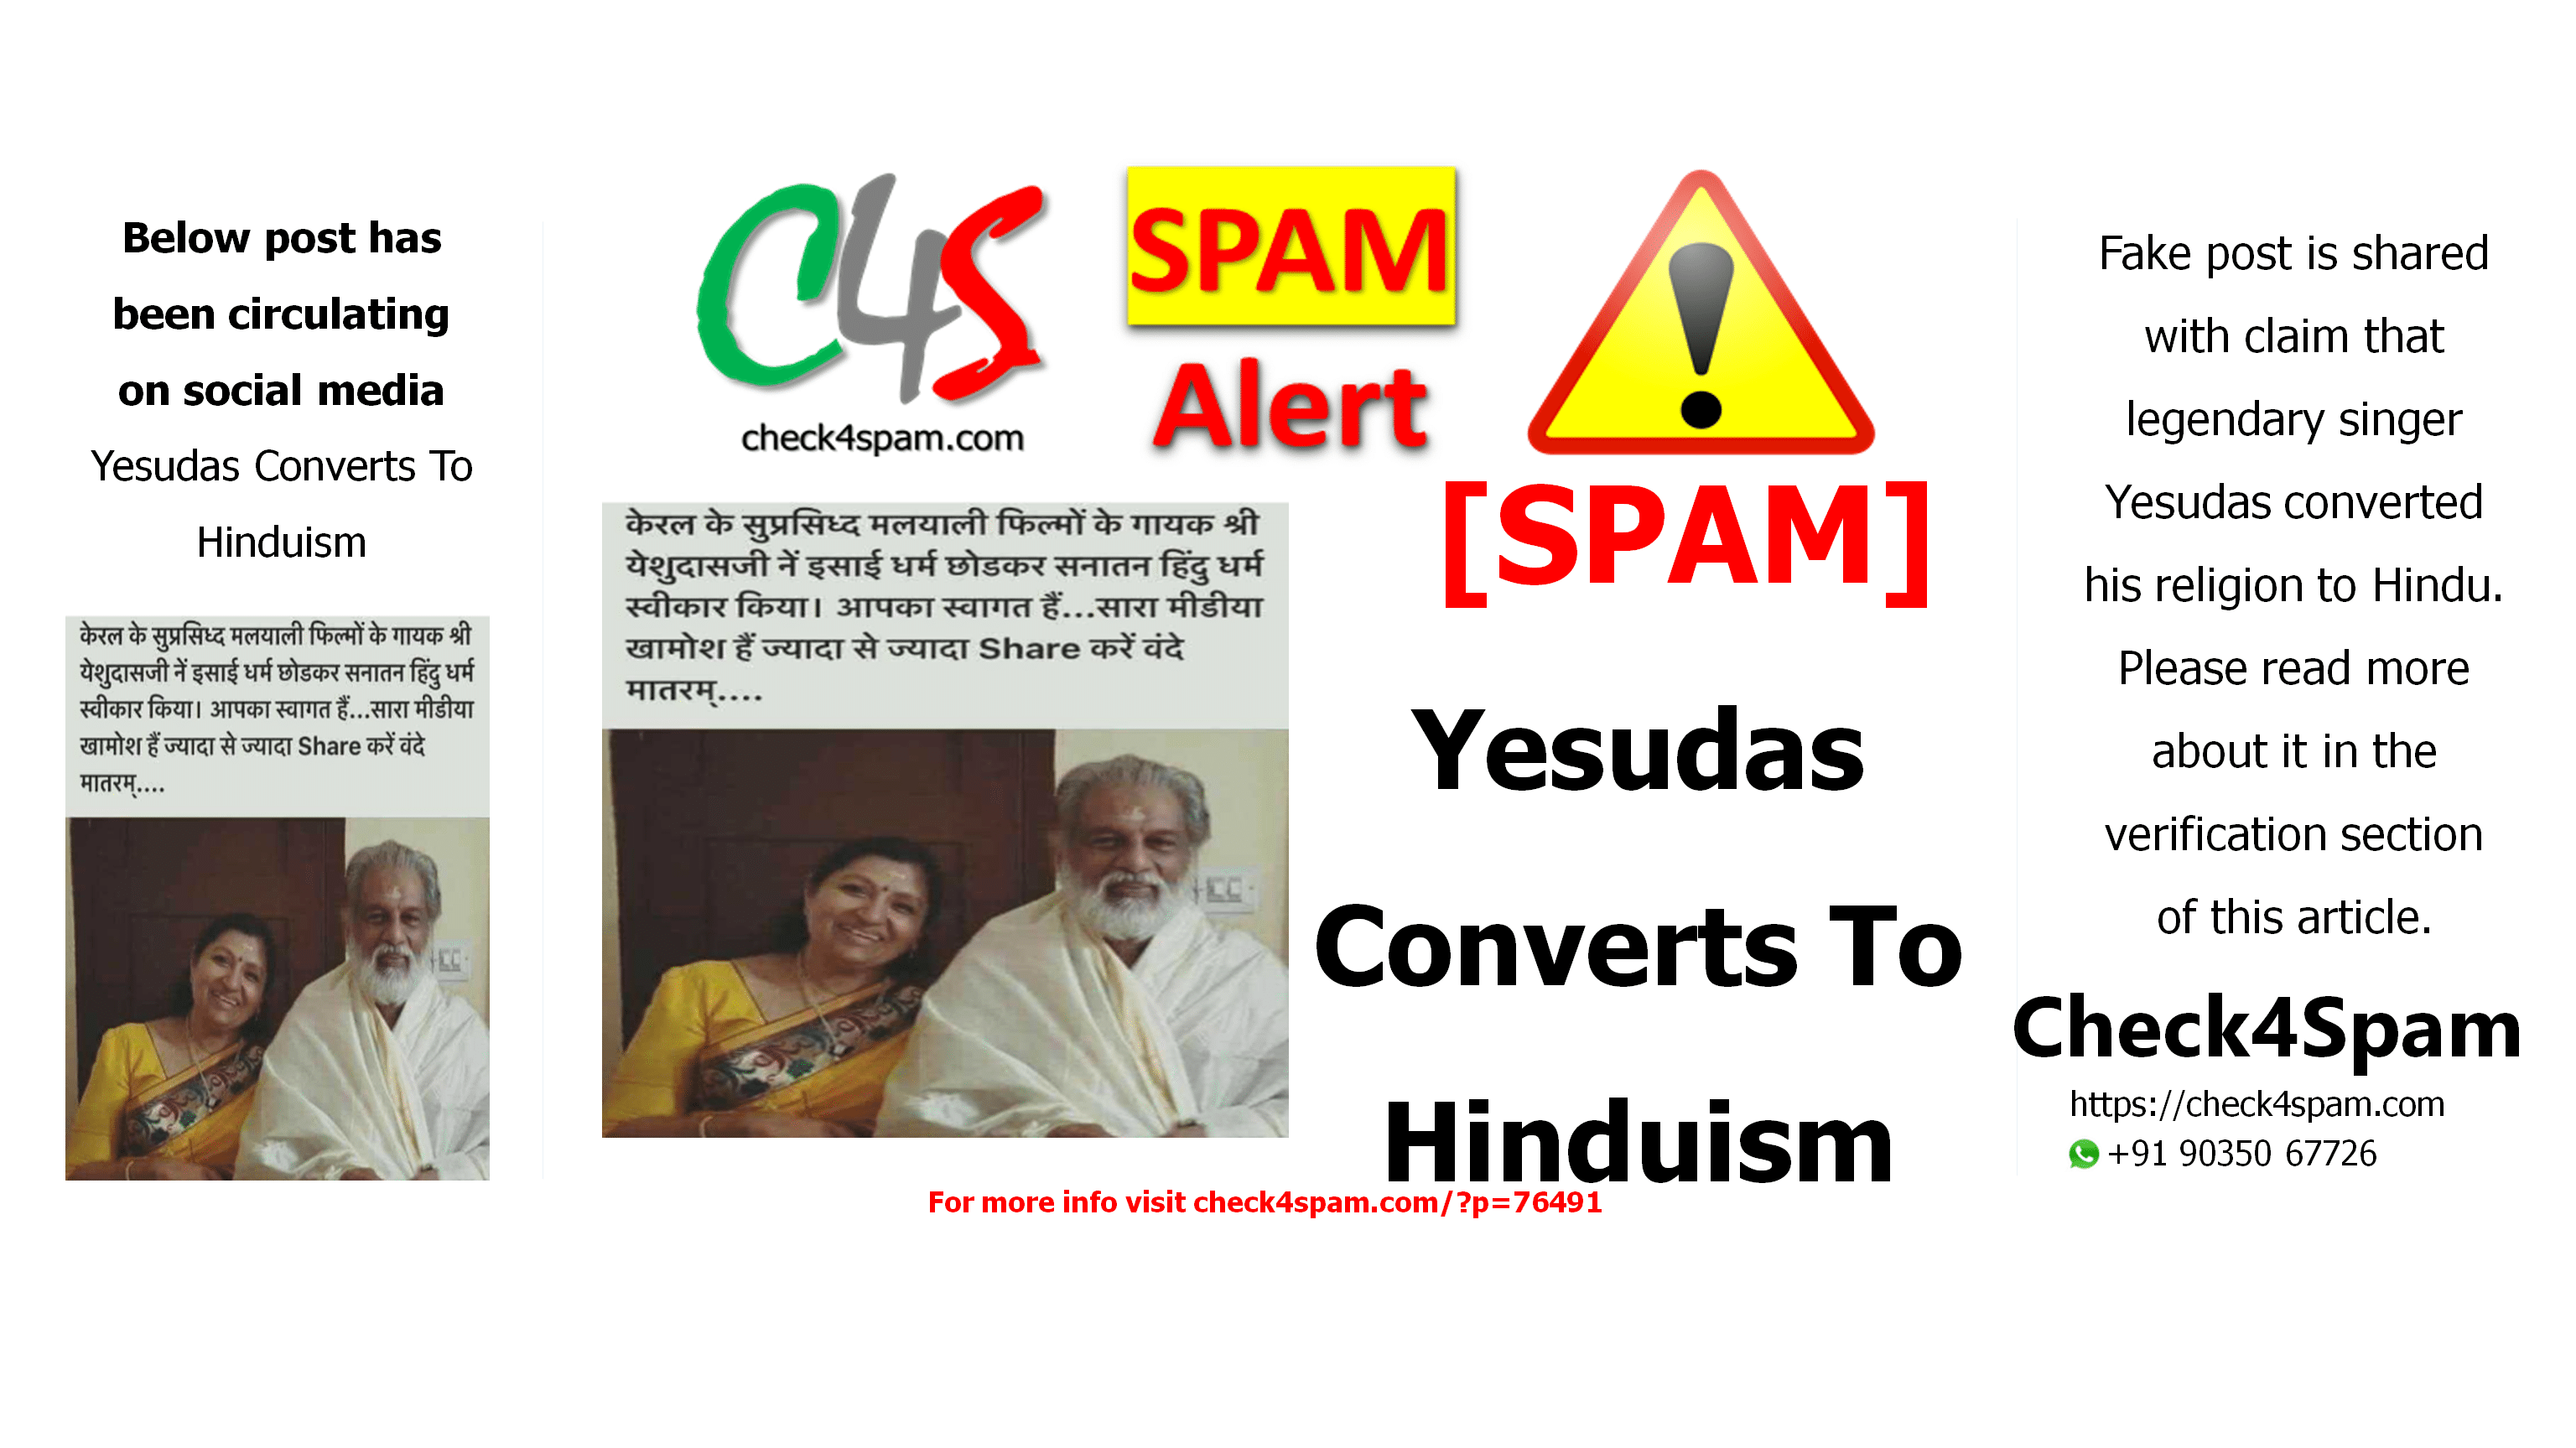 Yesudas Converts To Hinduism